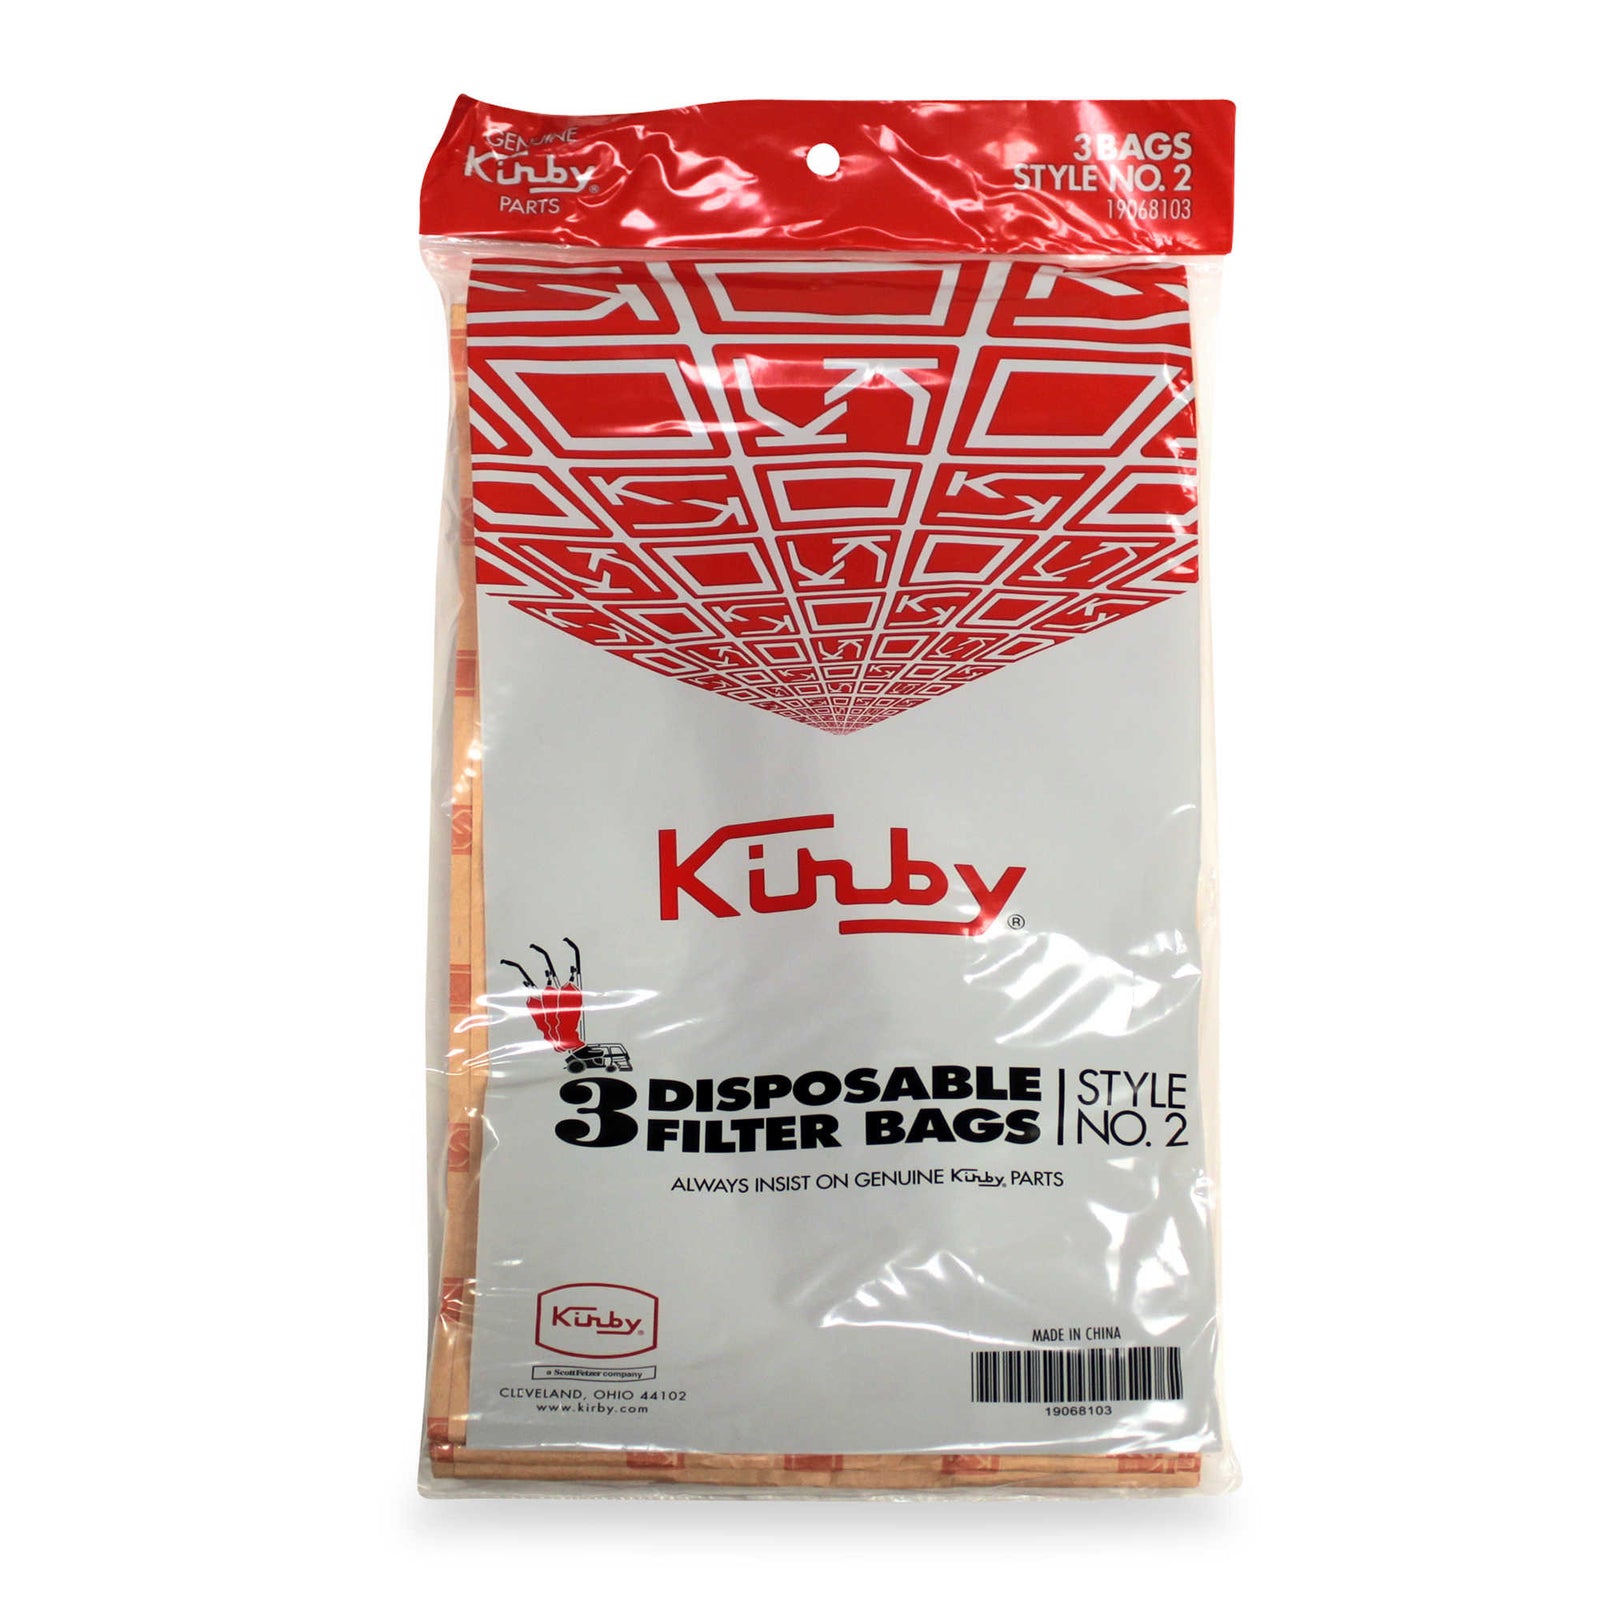 Kirby Foam Carpet and Fabric Cleaner Part 22 oz. # 289215